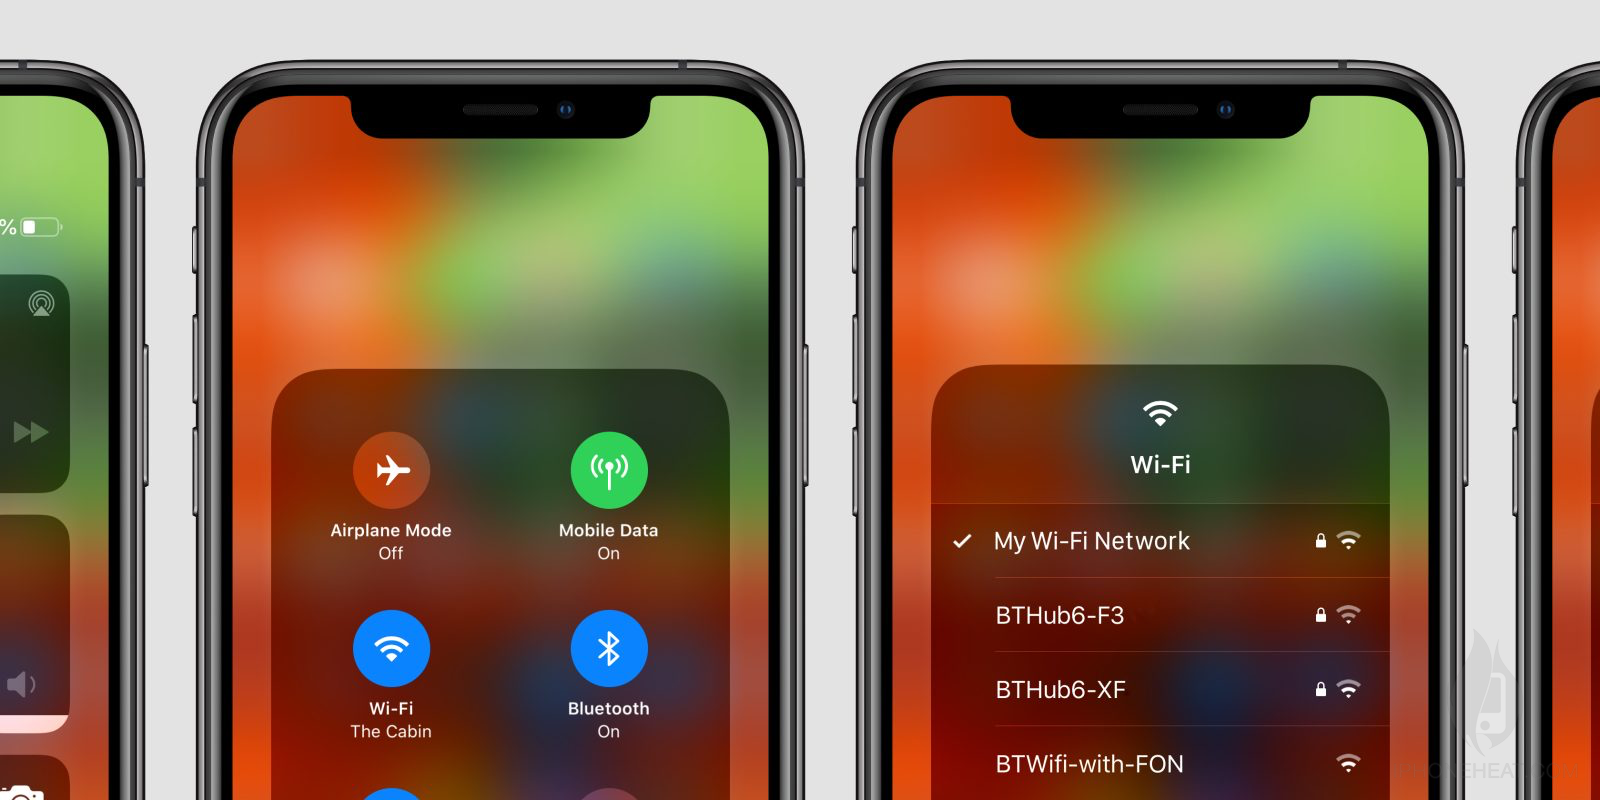 Better WIFI Options in Control Center